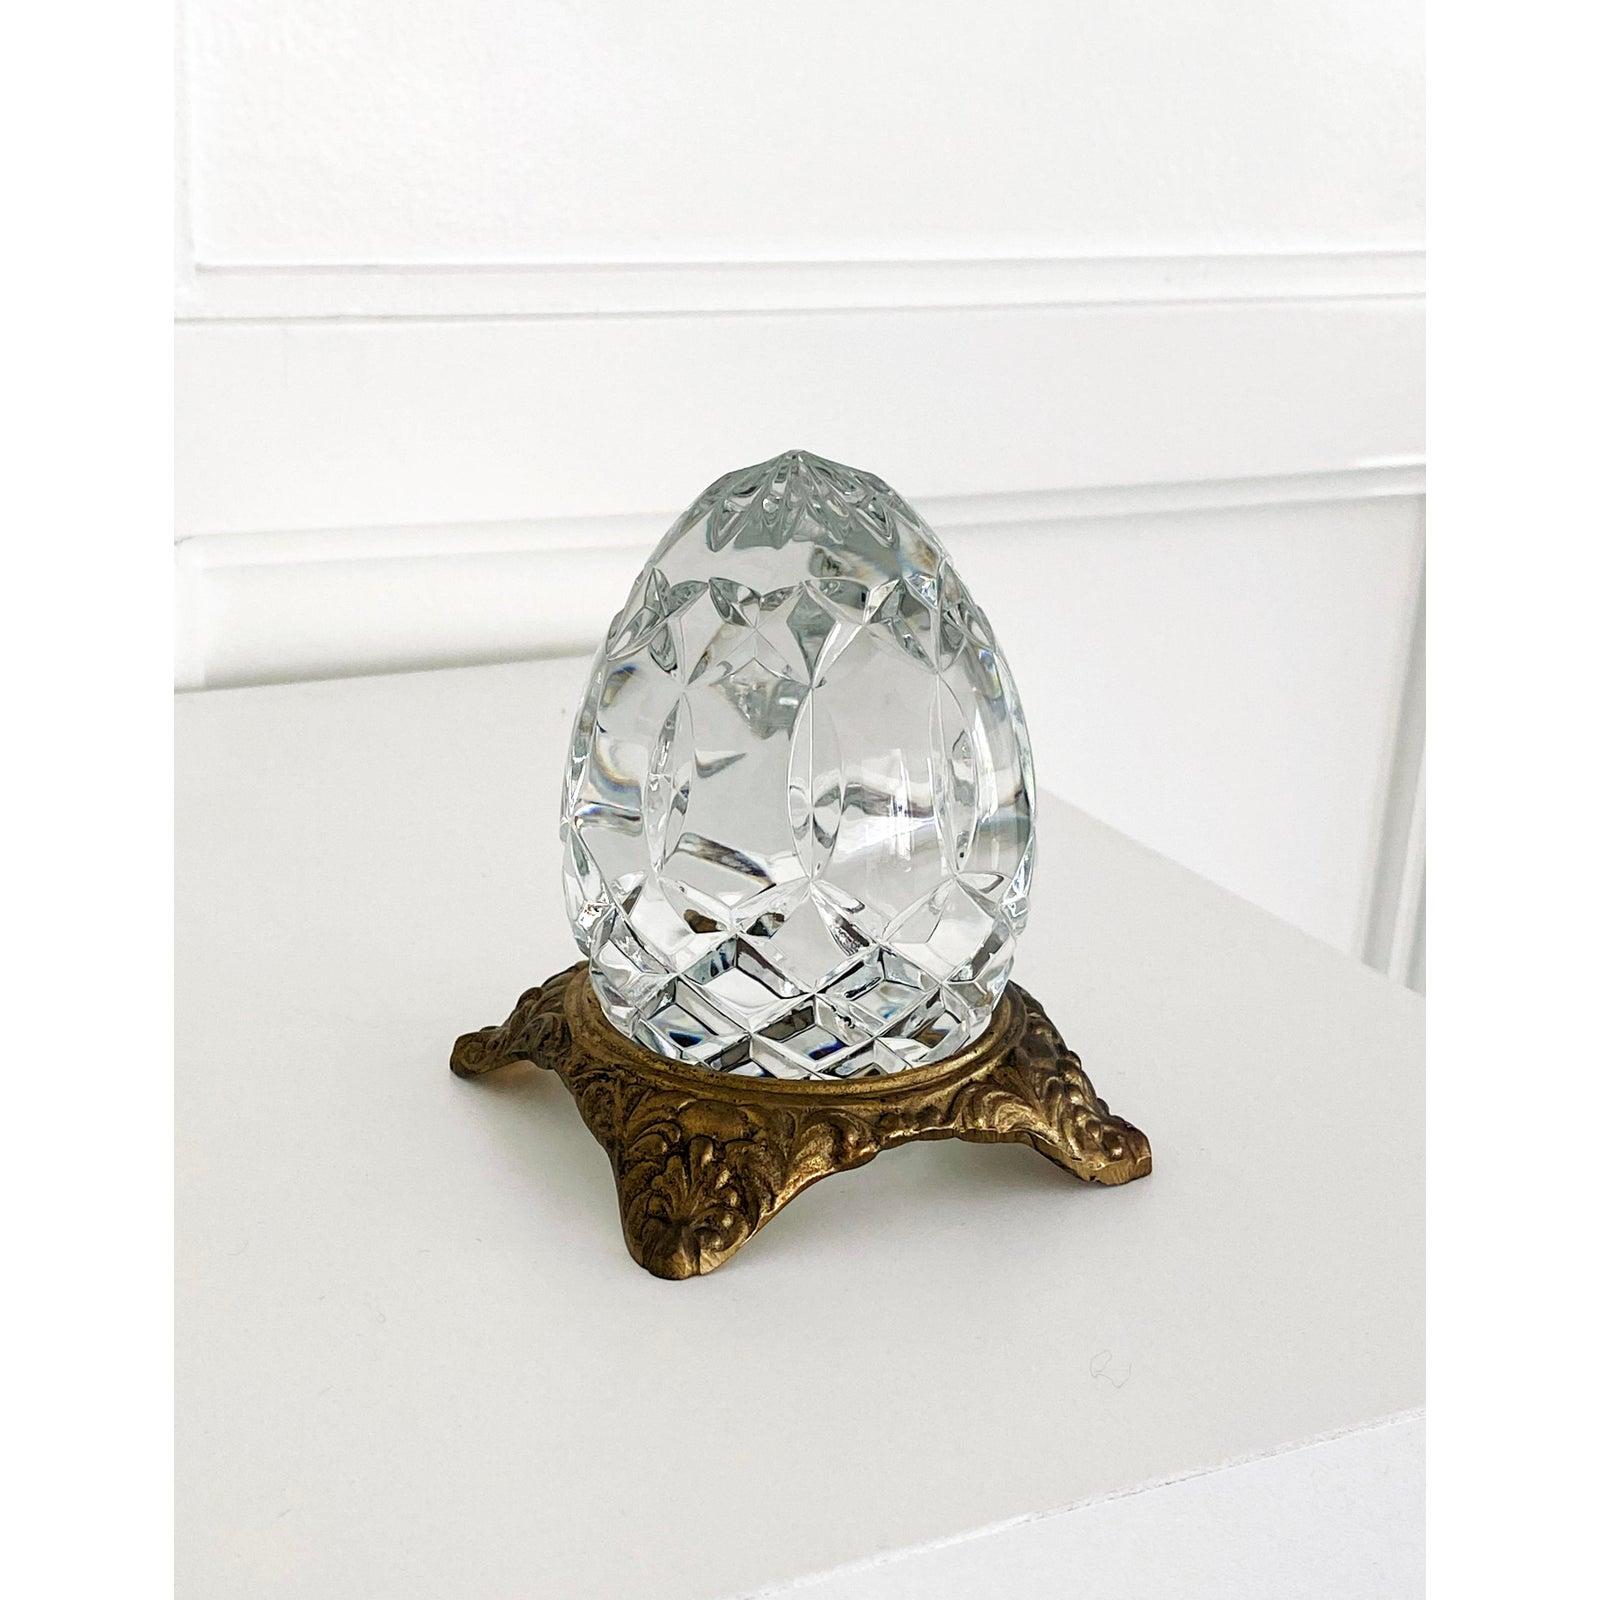 waterford crystal egg paperweight